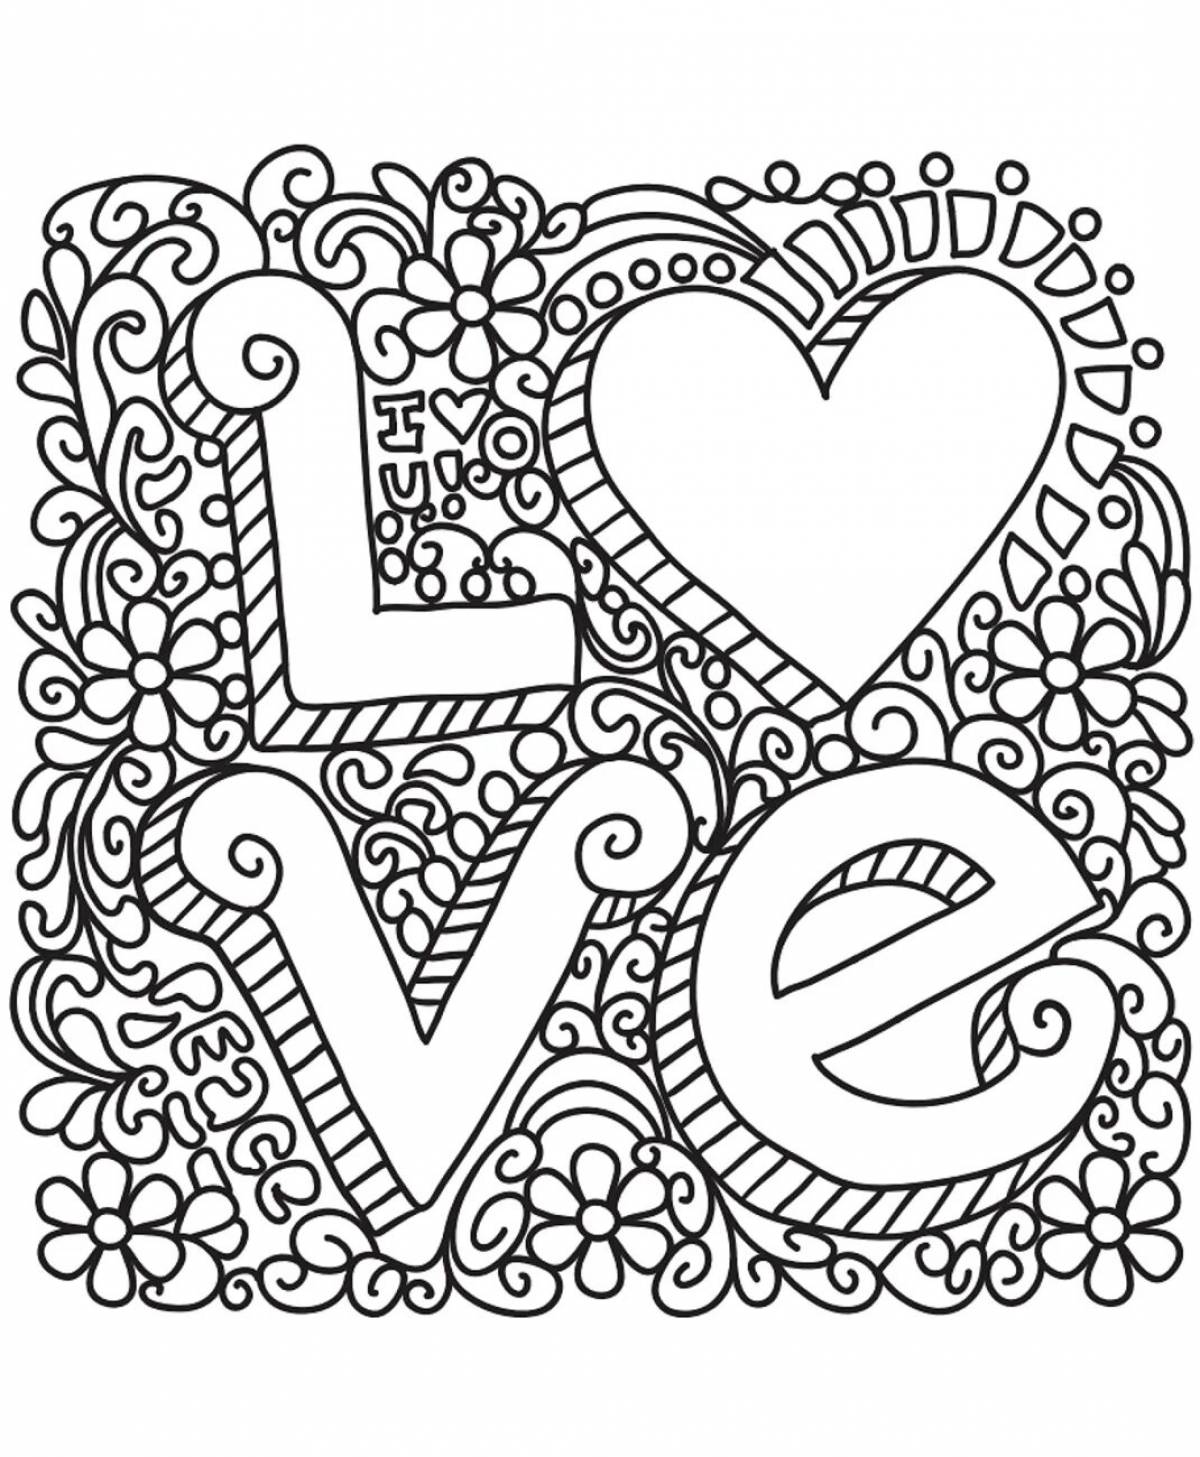 Coloring book exquisite love antistress